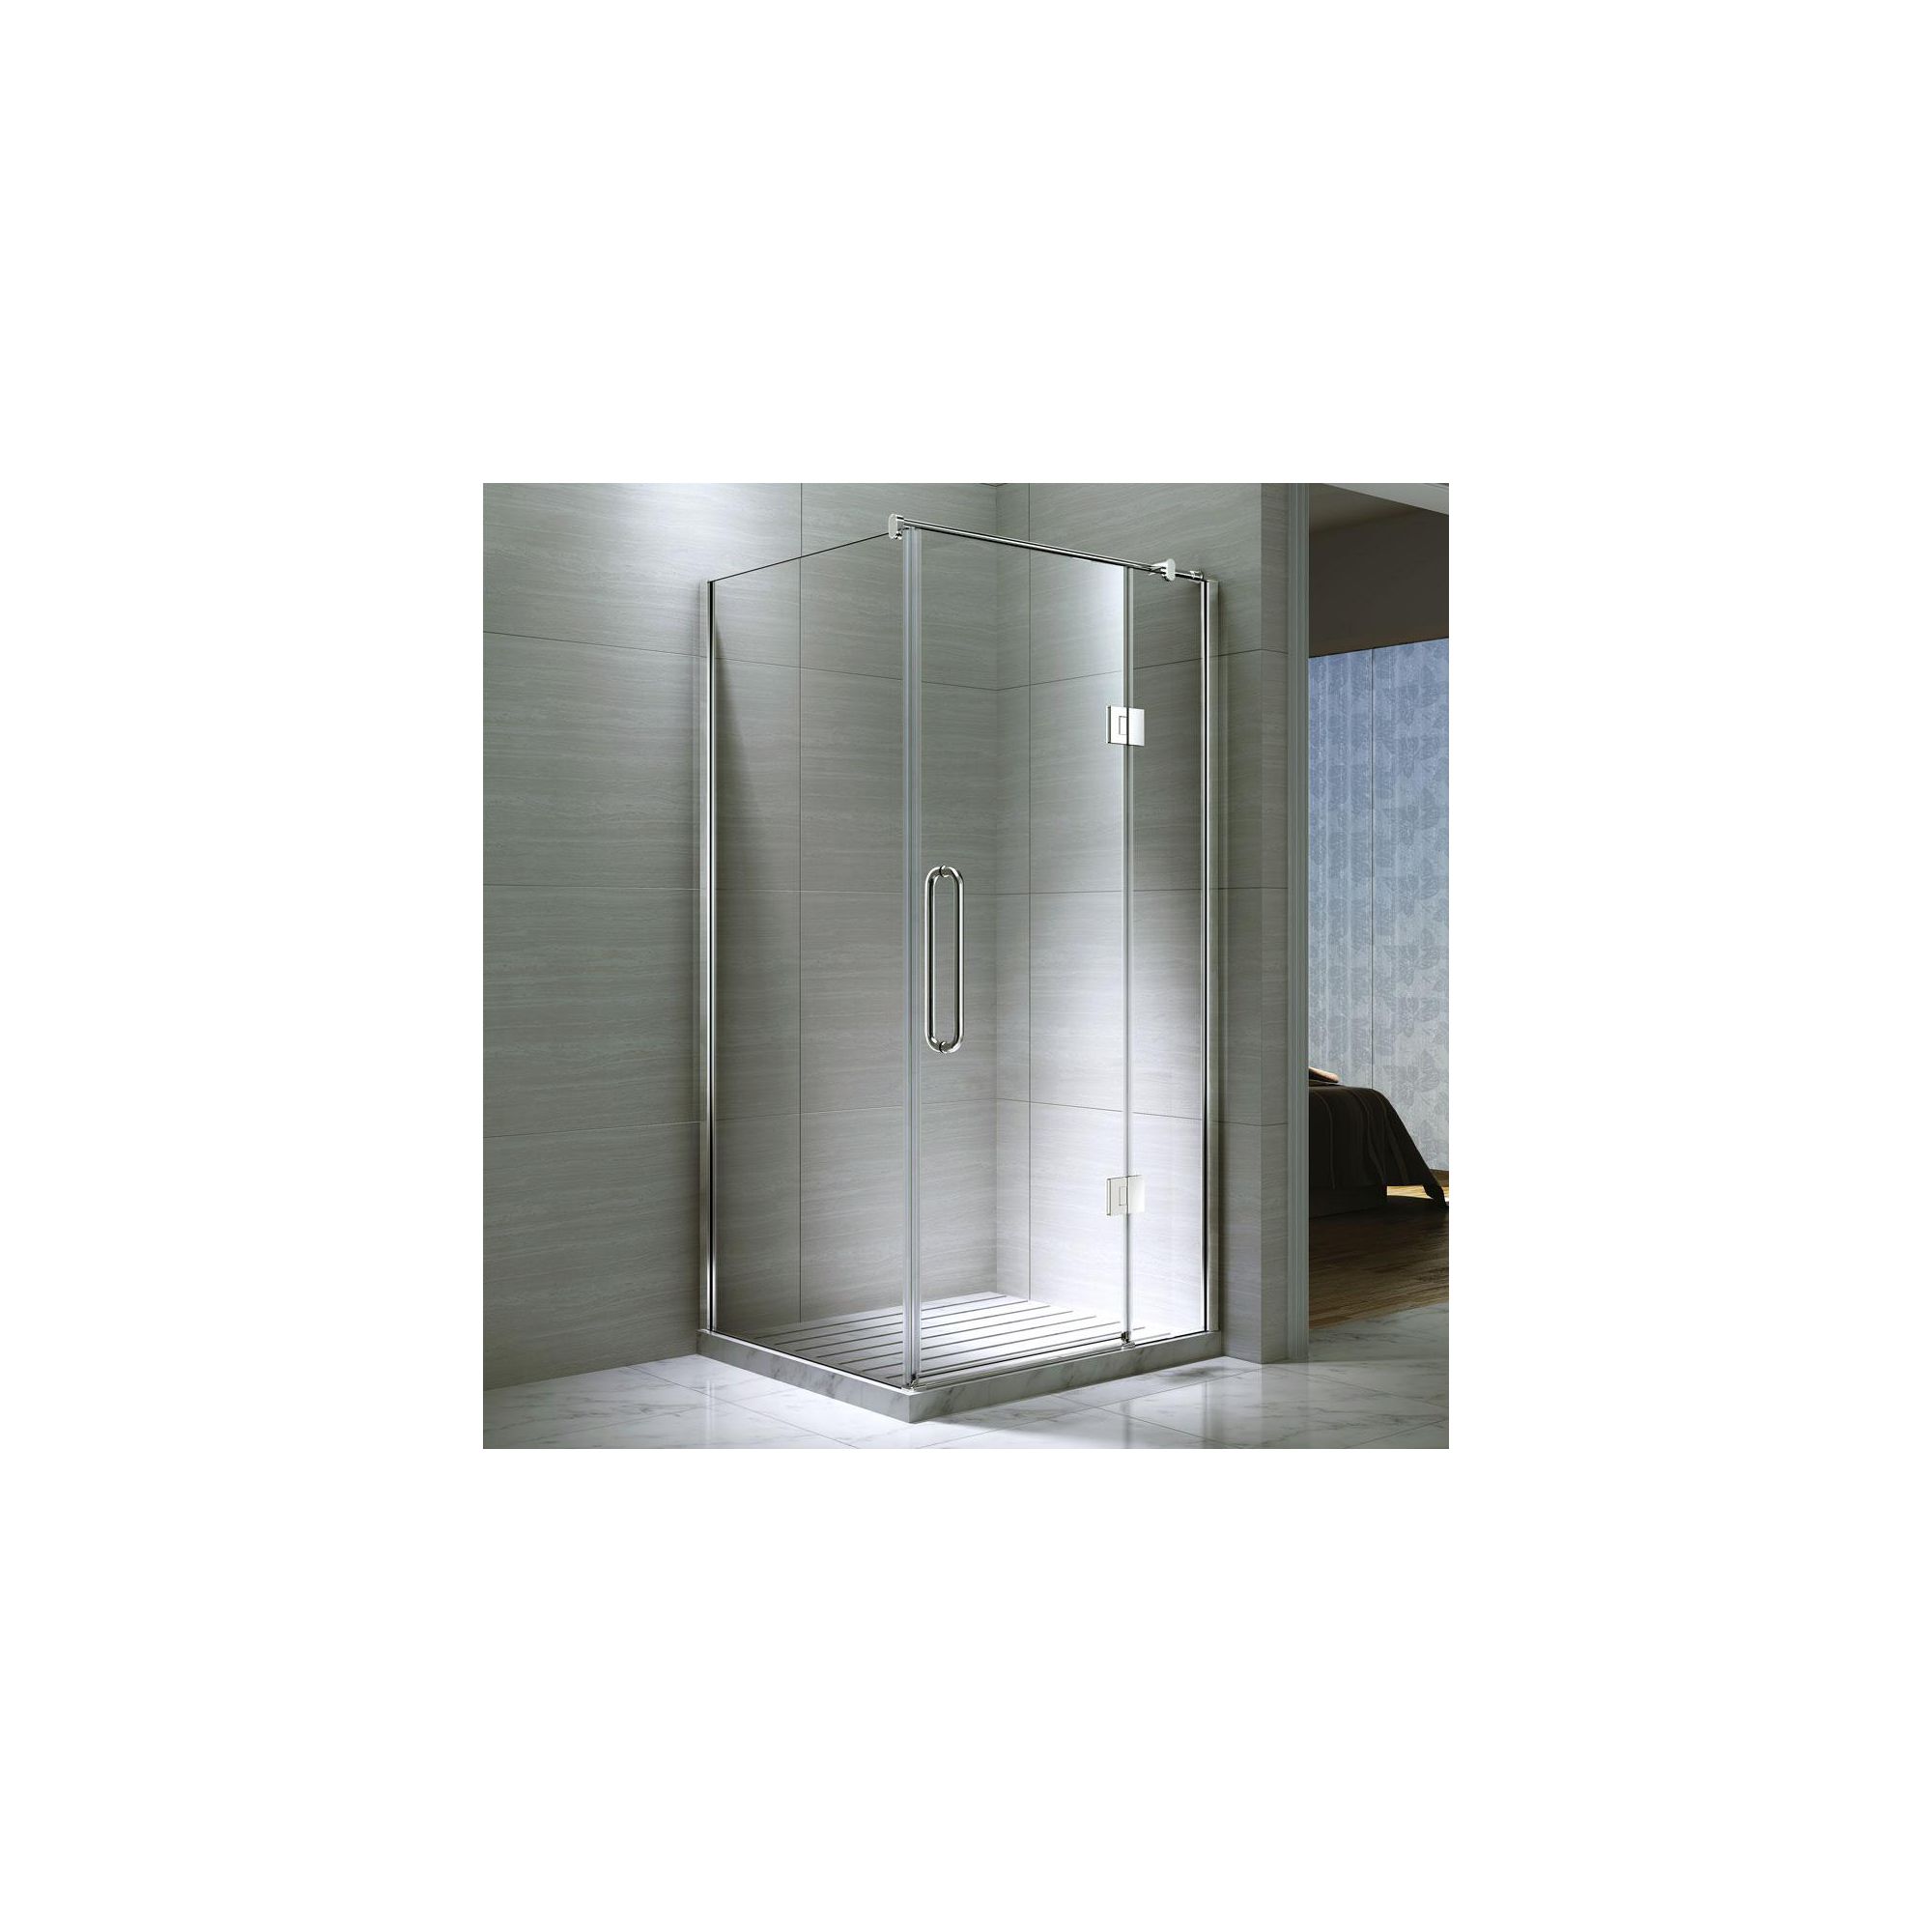 Desire Ten Hinged Shower Door with Side Panel, 900mm x 900mm, Semi-Frameless, 10mm Glass at Tesco Direct